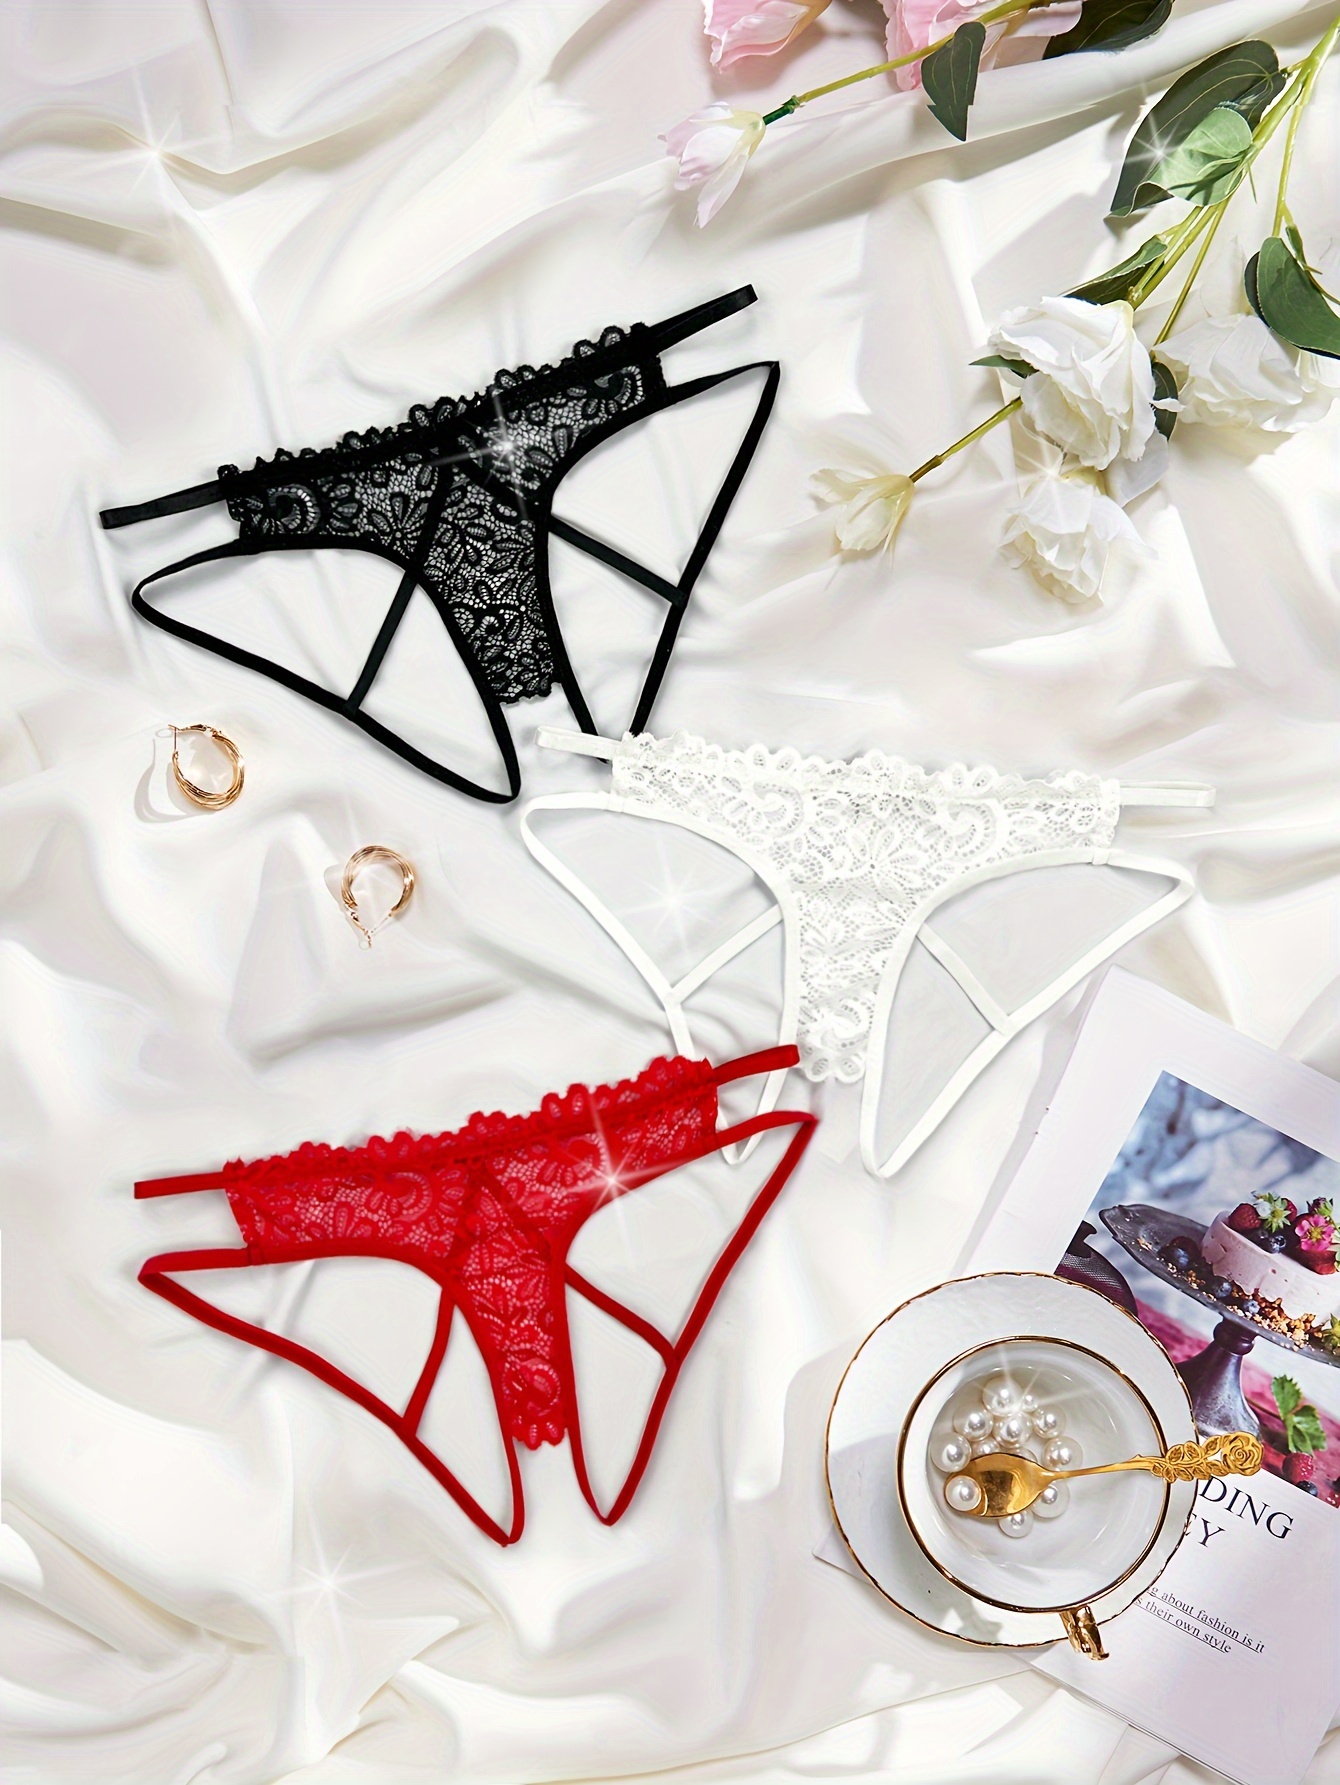 3pcs Sexy Floral Lace Sheer Thongs - Low Waist Open Crotch G-String Panties  for Women's Lingerie & Underwear - Comfortable and Breathable